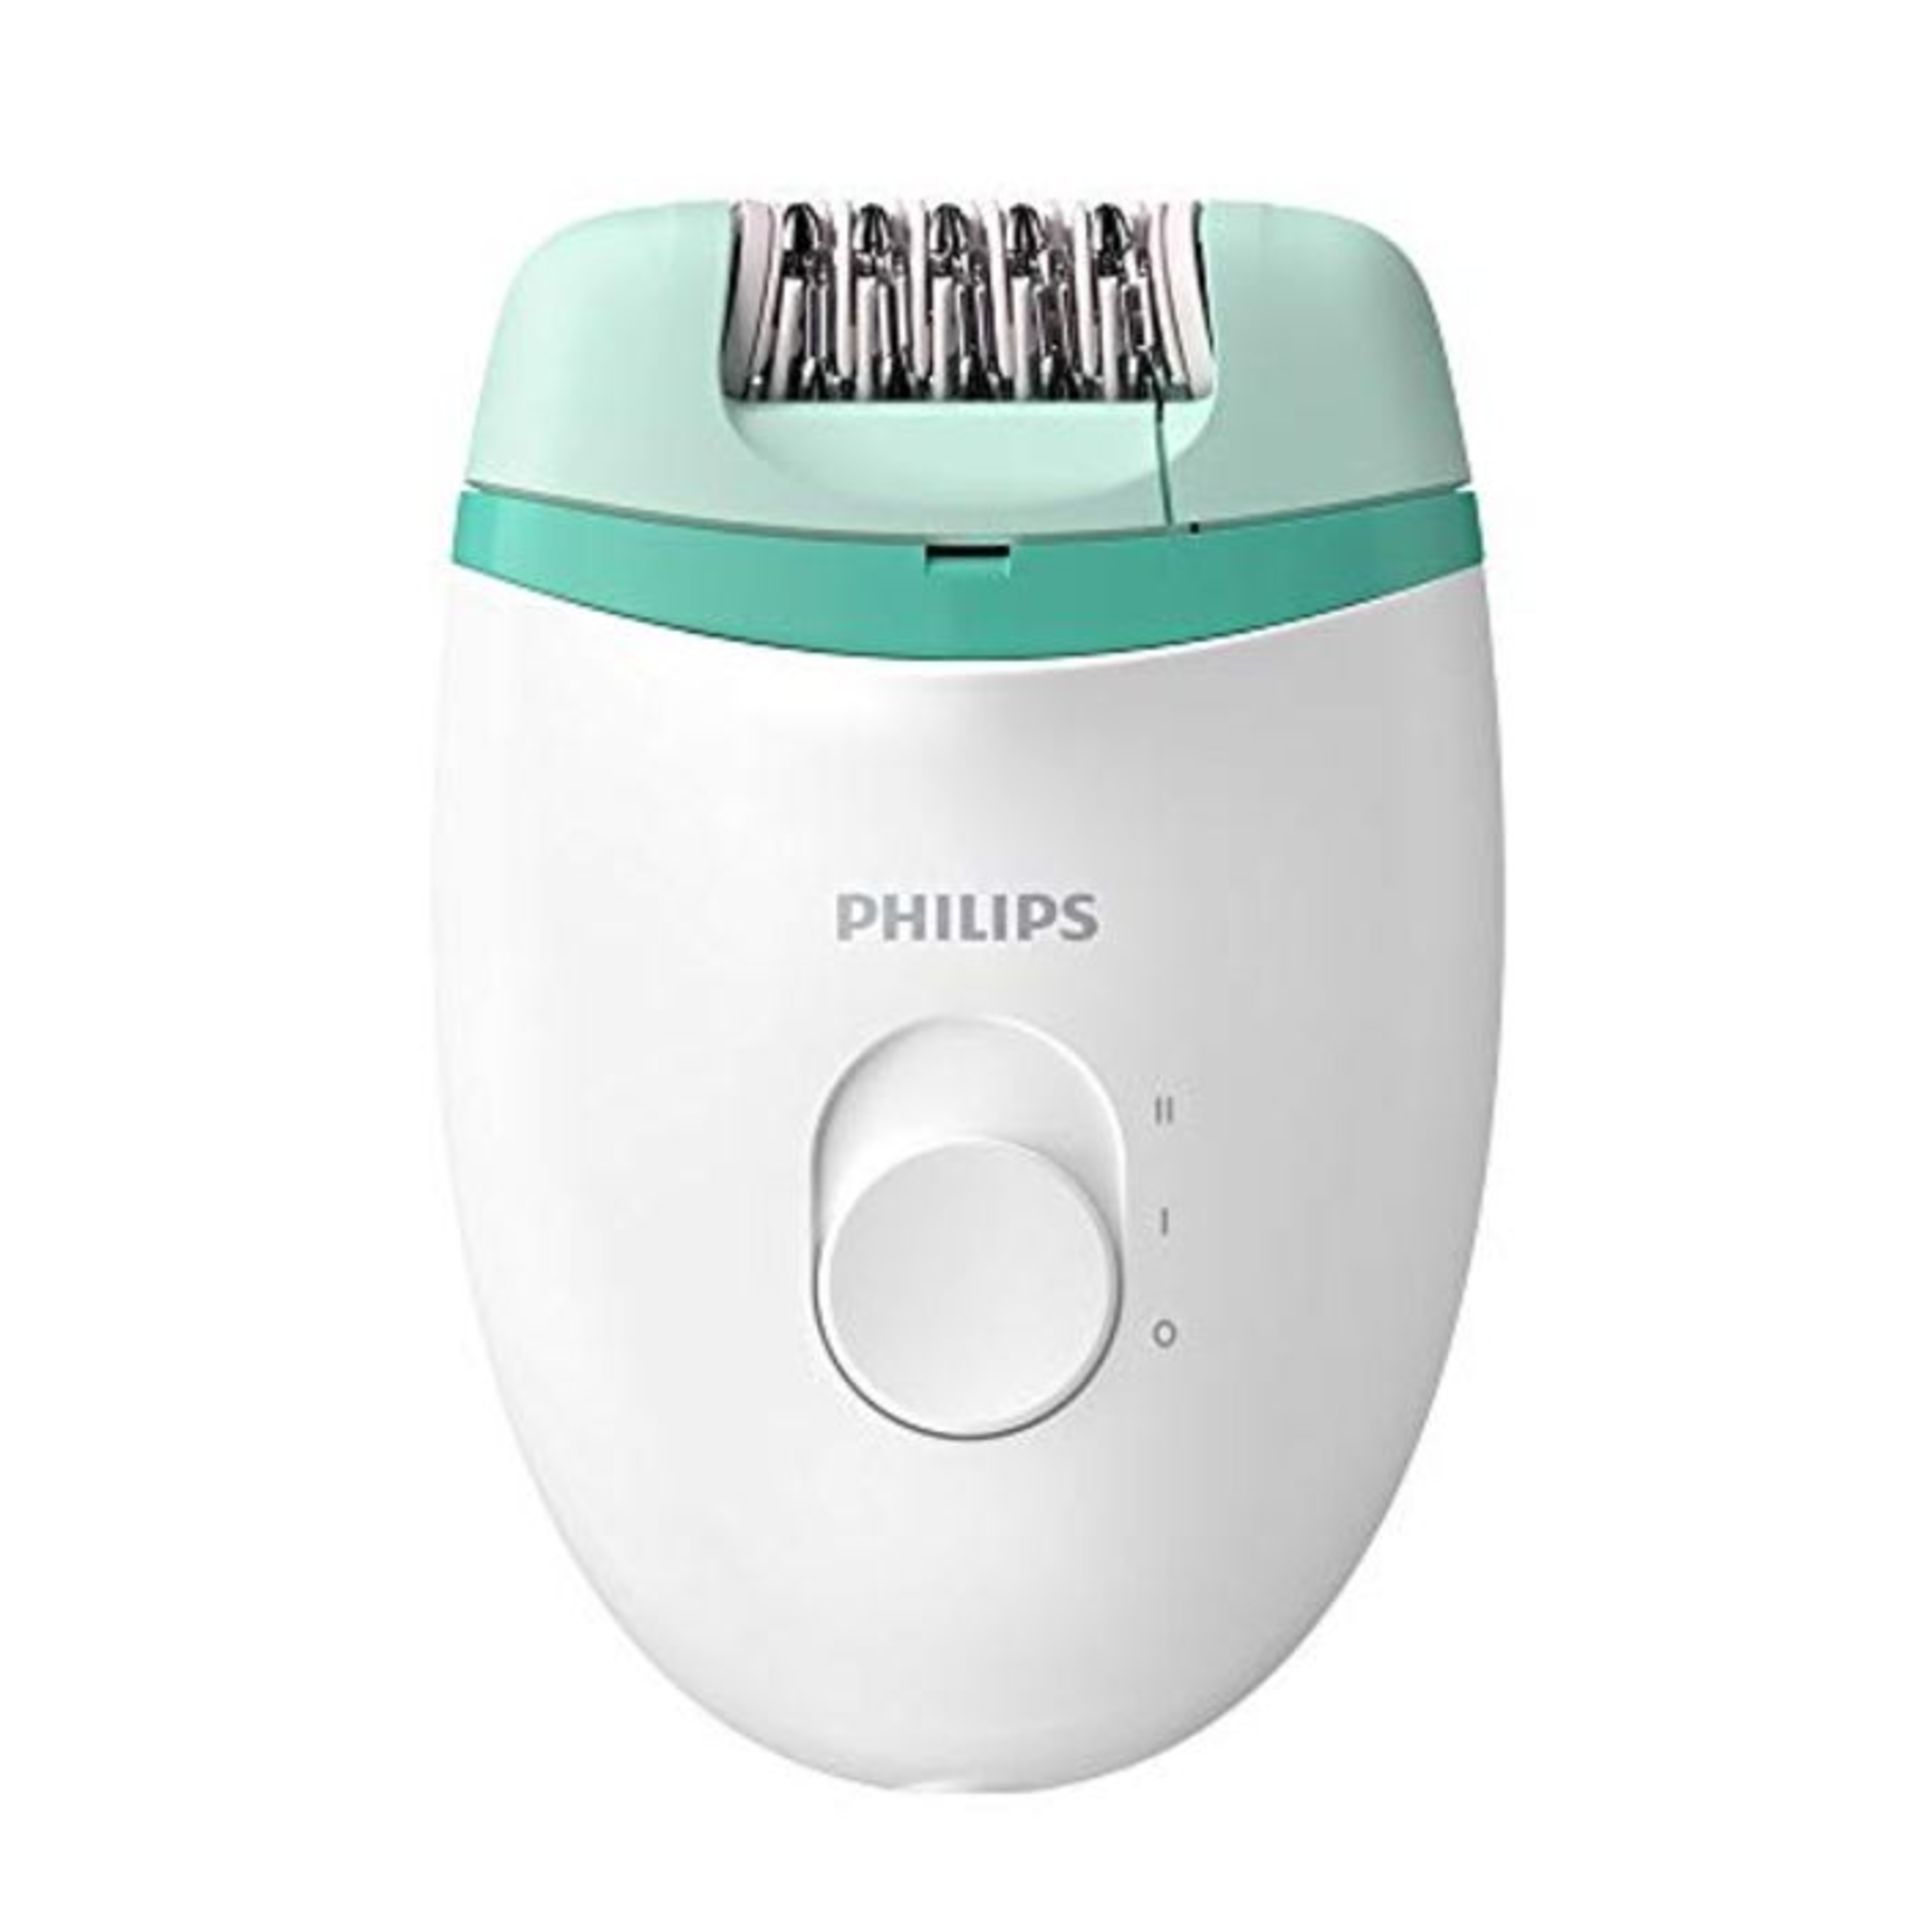 Philips Satinelle Essential Epilator, Corded, Compact Hair Removal, BRE224/00